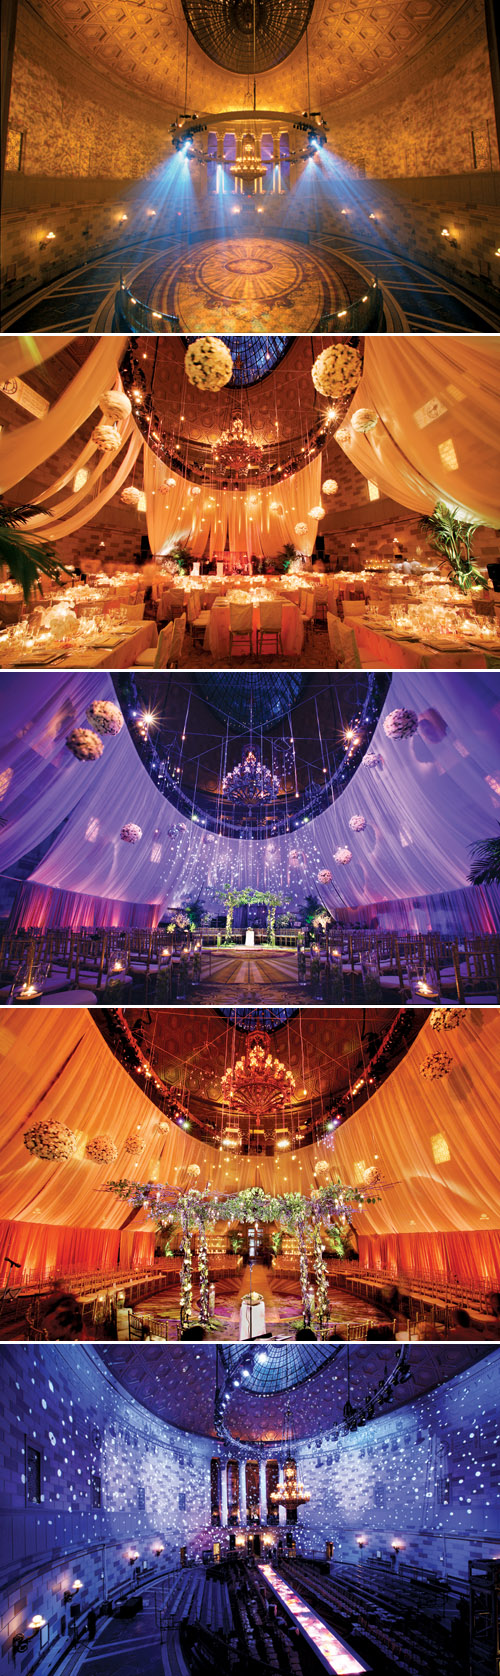 amazing wedding lighting design at Gotham Hall in New York by Bentley Meeker from his Light X Design book